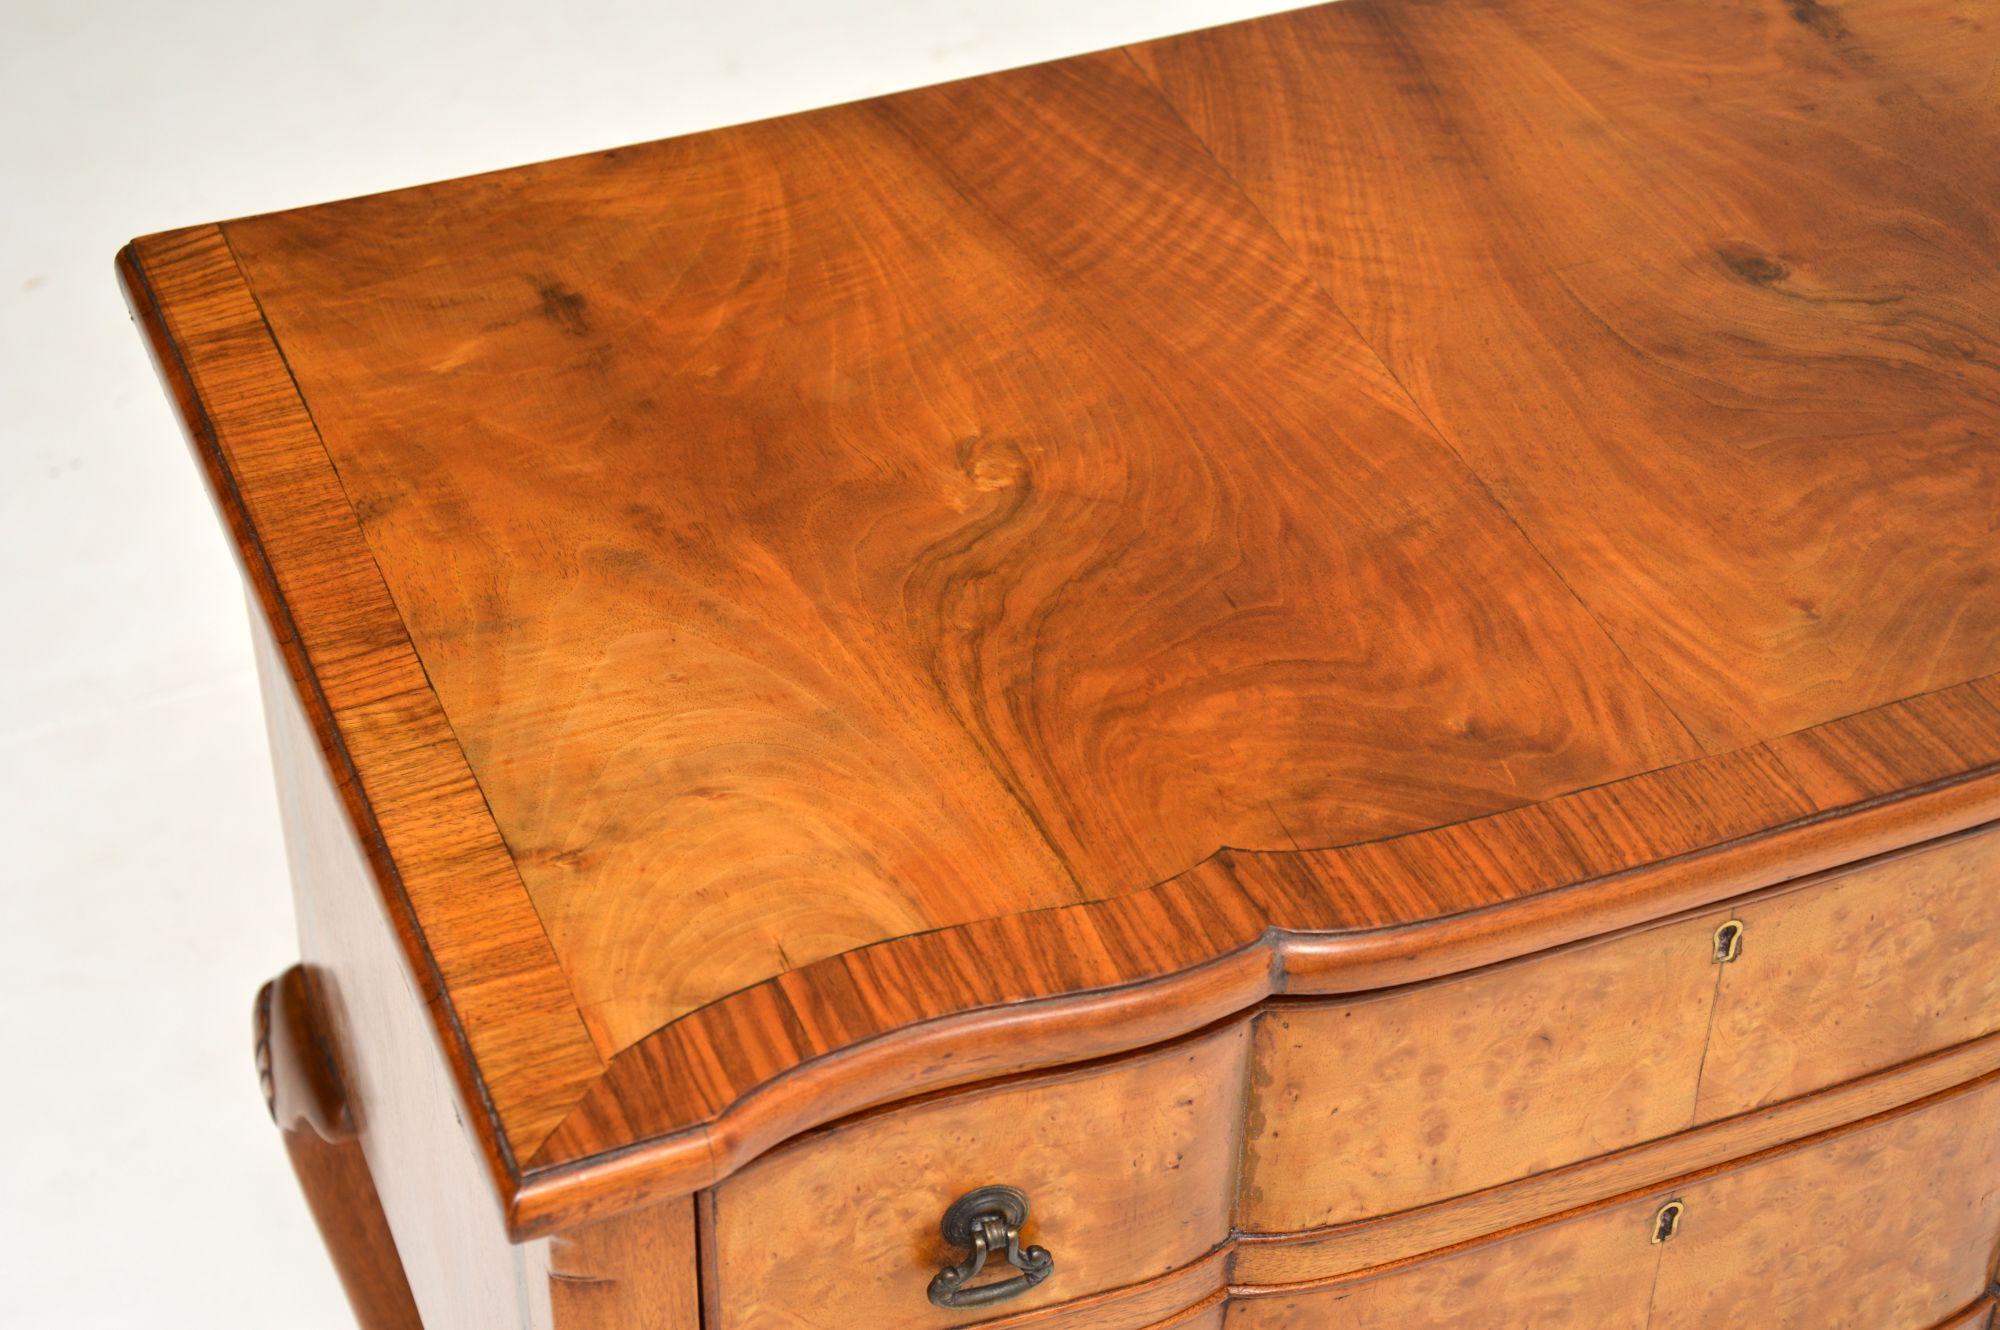 Antique burr walnut lowboy chest with canted corners on solid walnut legs with shell carvings and pad feet. It’s in very good original condition with a lovely warm color and dates to circa 1910s-1920s period. This side table has a shaped front with